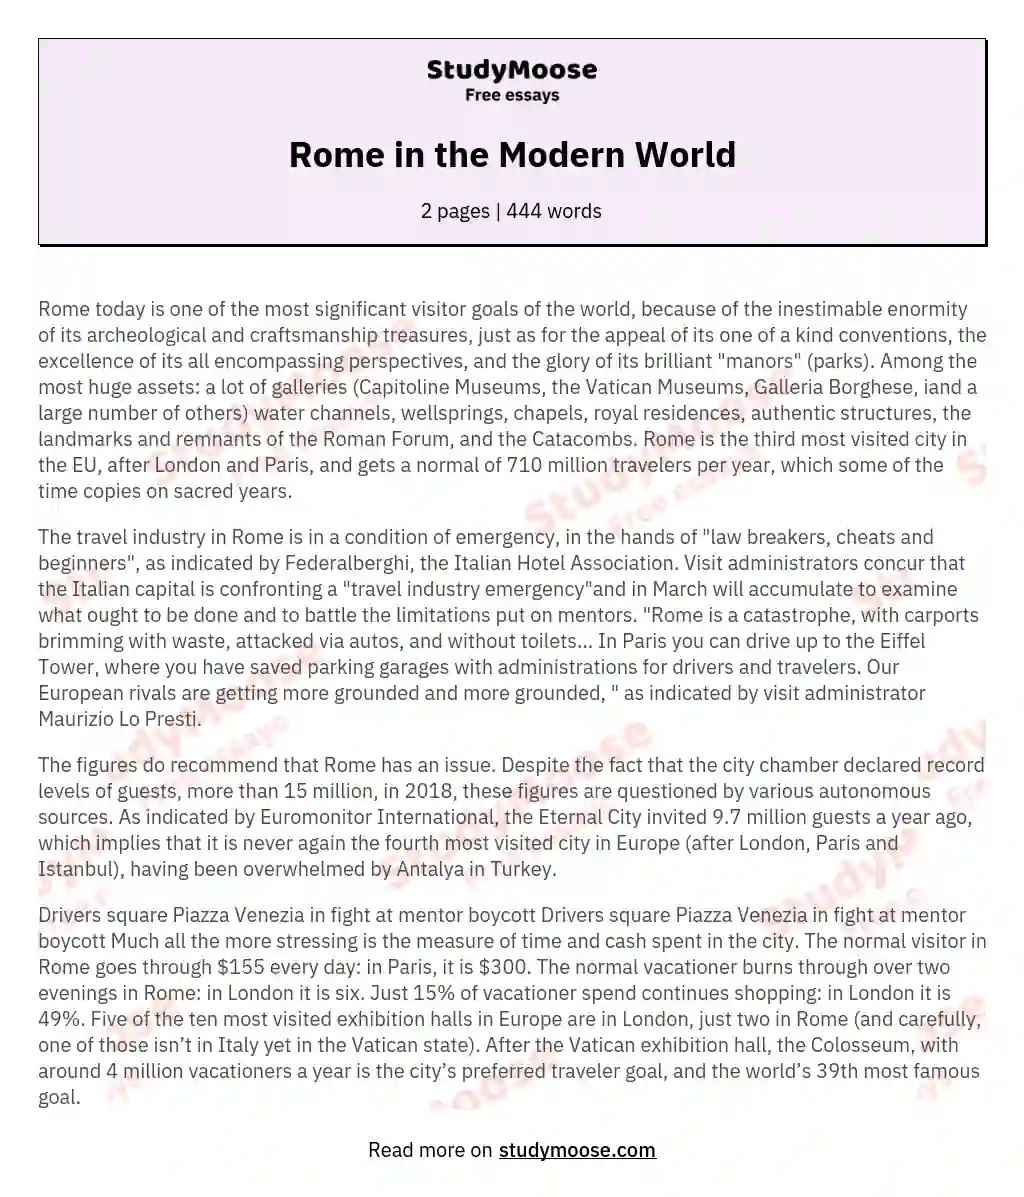 Rome in the Modern World essay